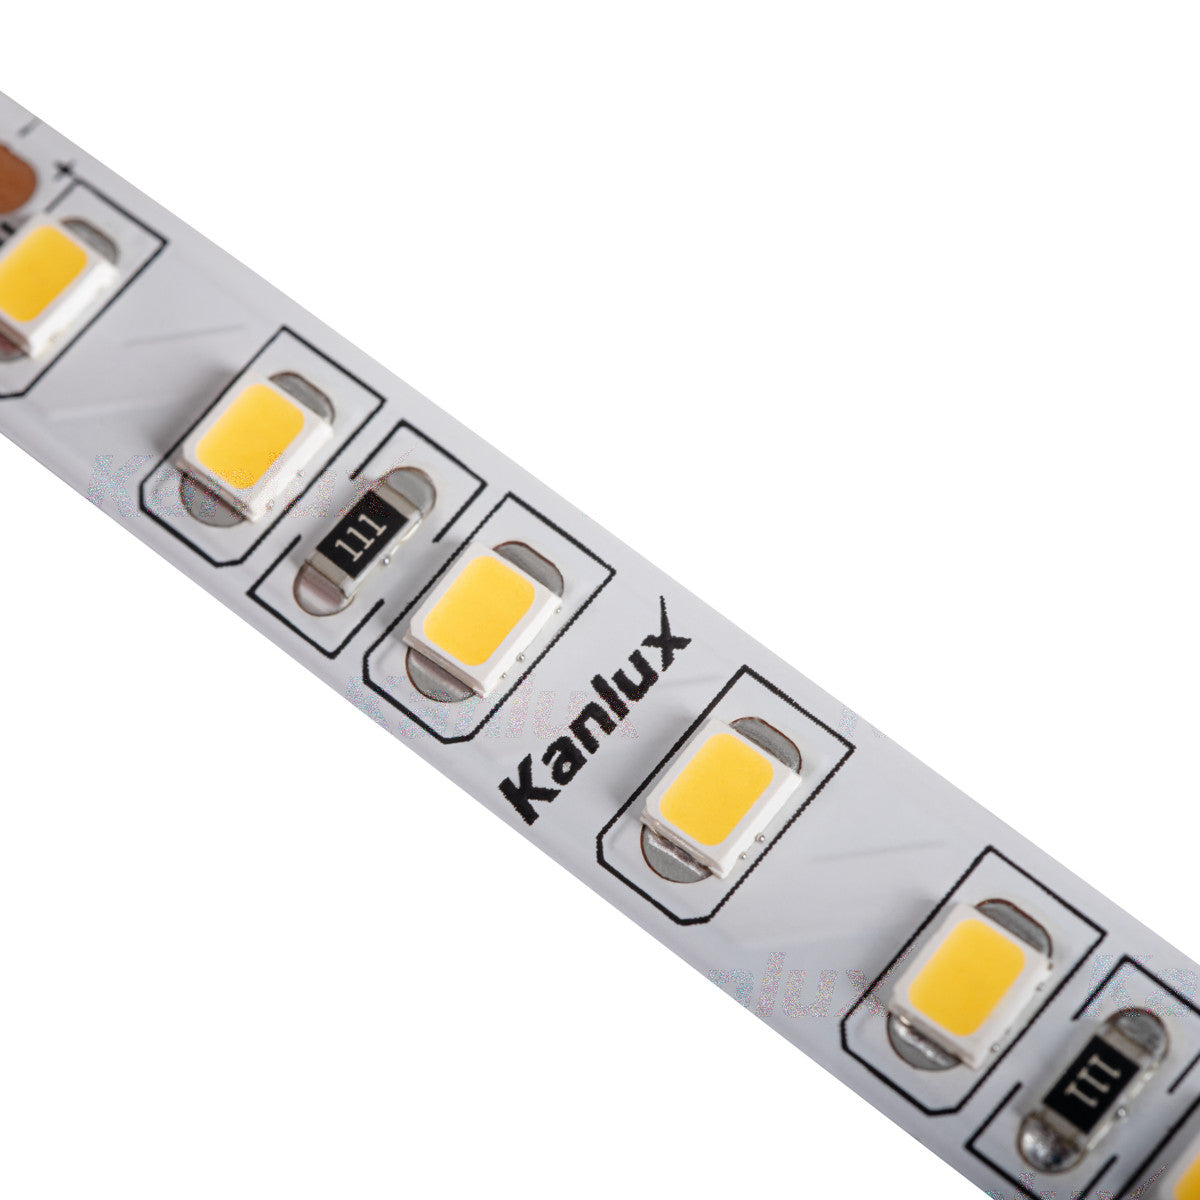 Kanlux Professional 30 Meter L120B 16W/M 24V 8mm LED Strip Tape Roll - Choice of Warm, Neutral and Cool White